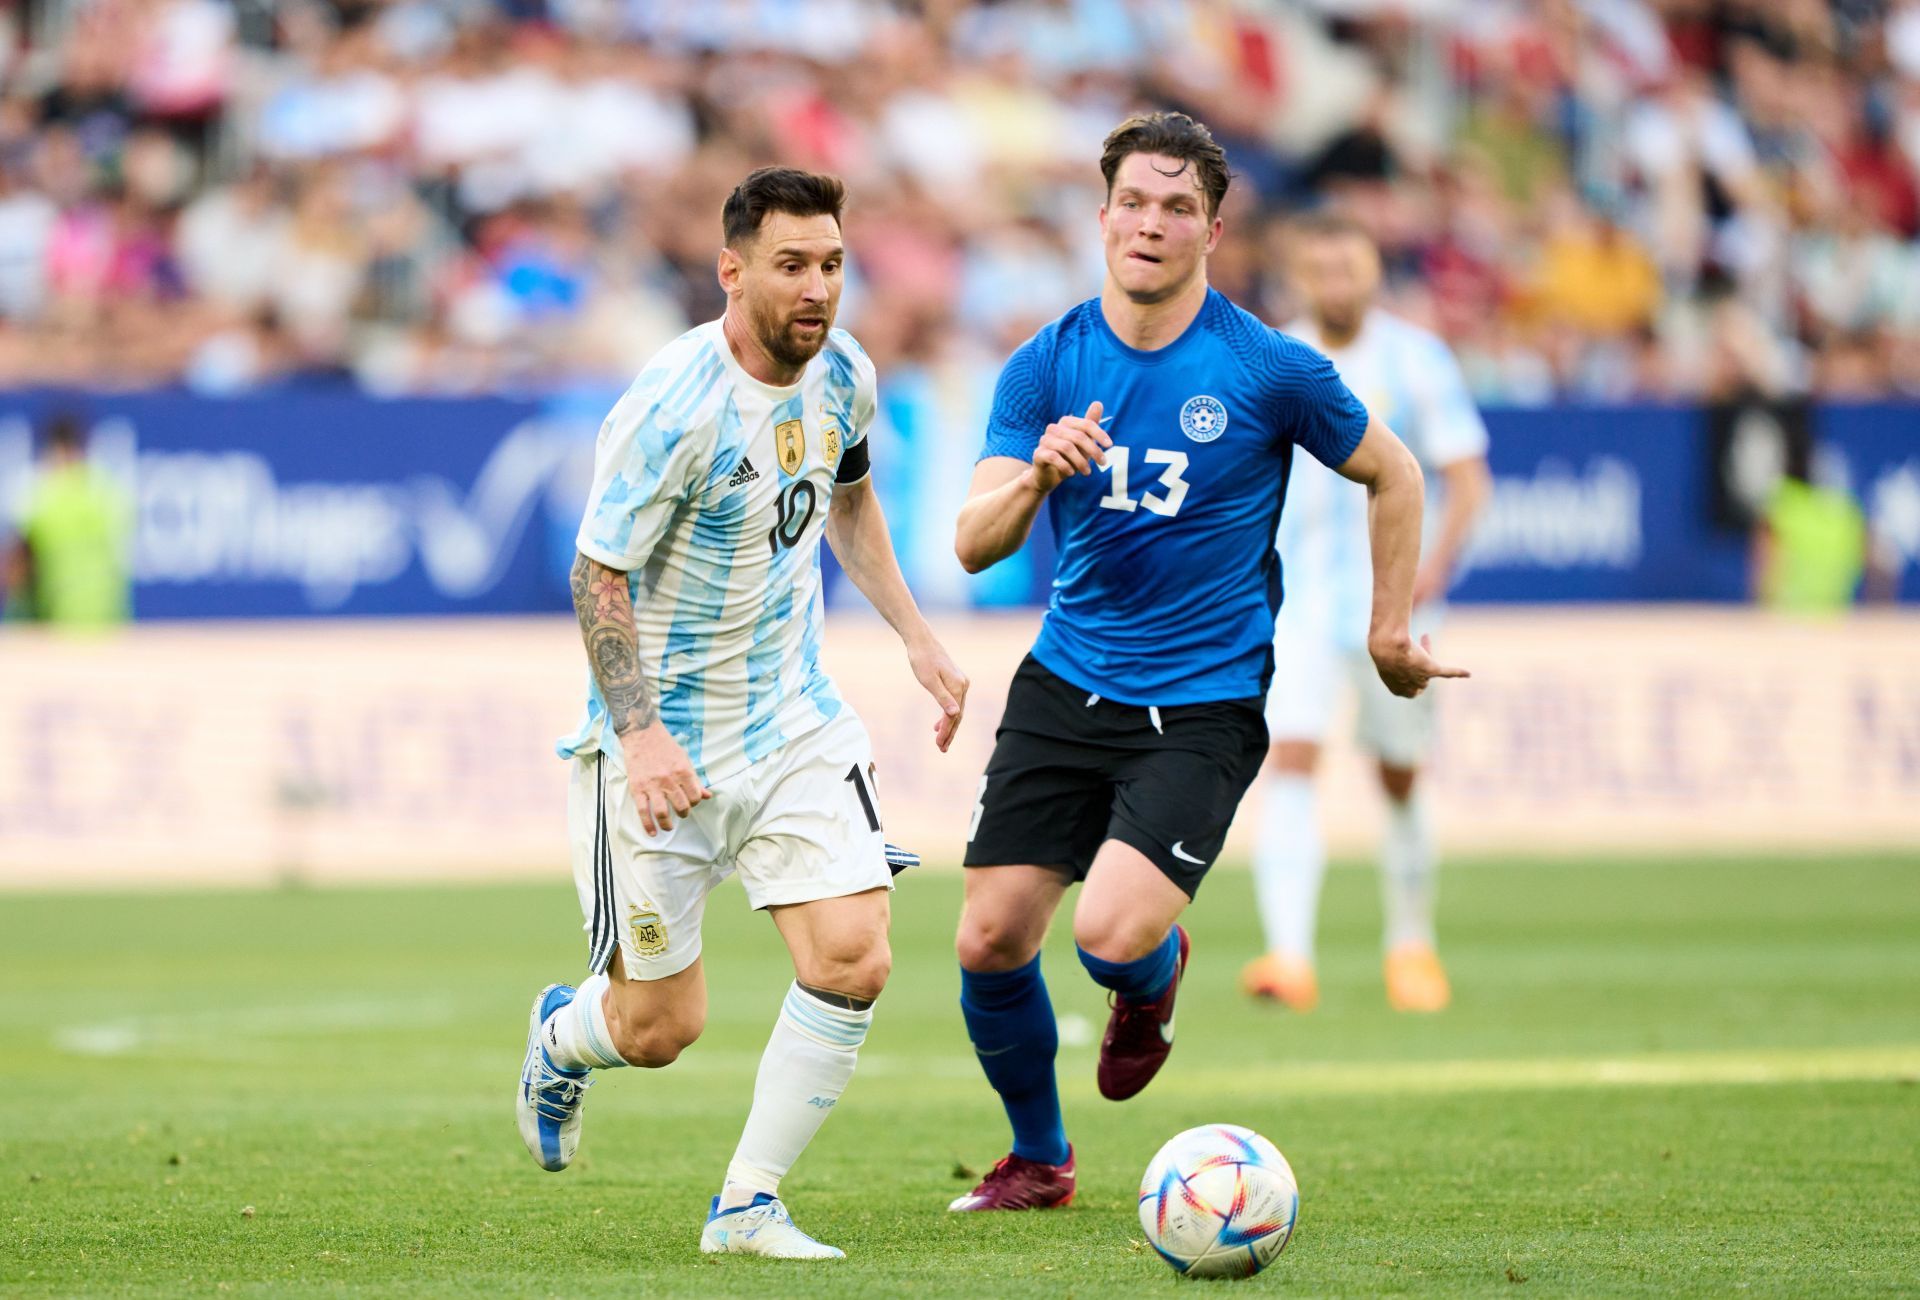 Lionel Messi has been in glorious form with his national team in recent games.